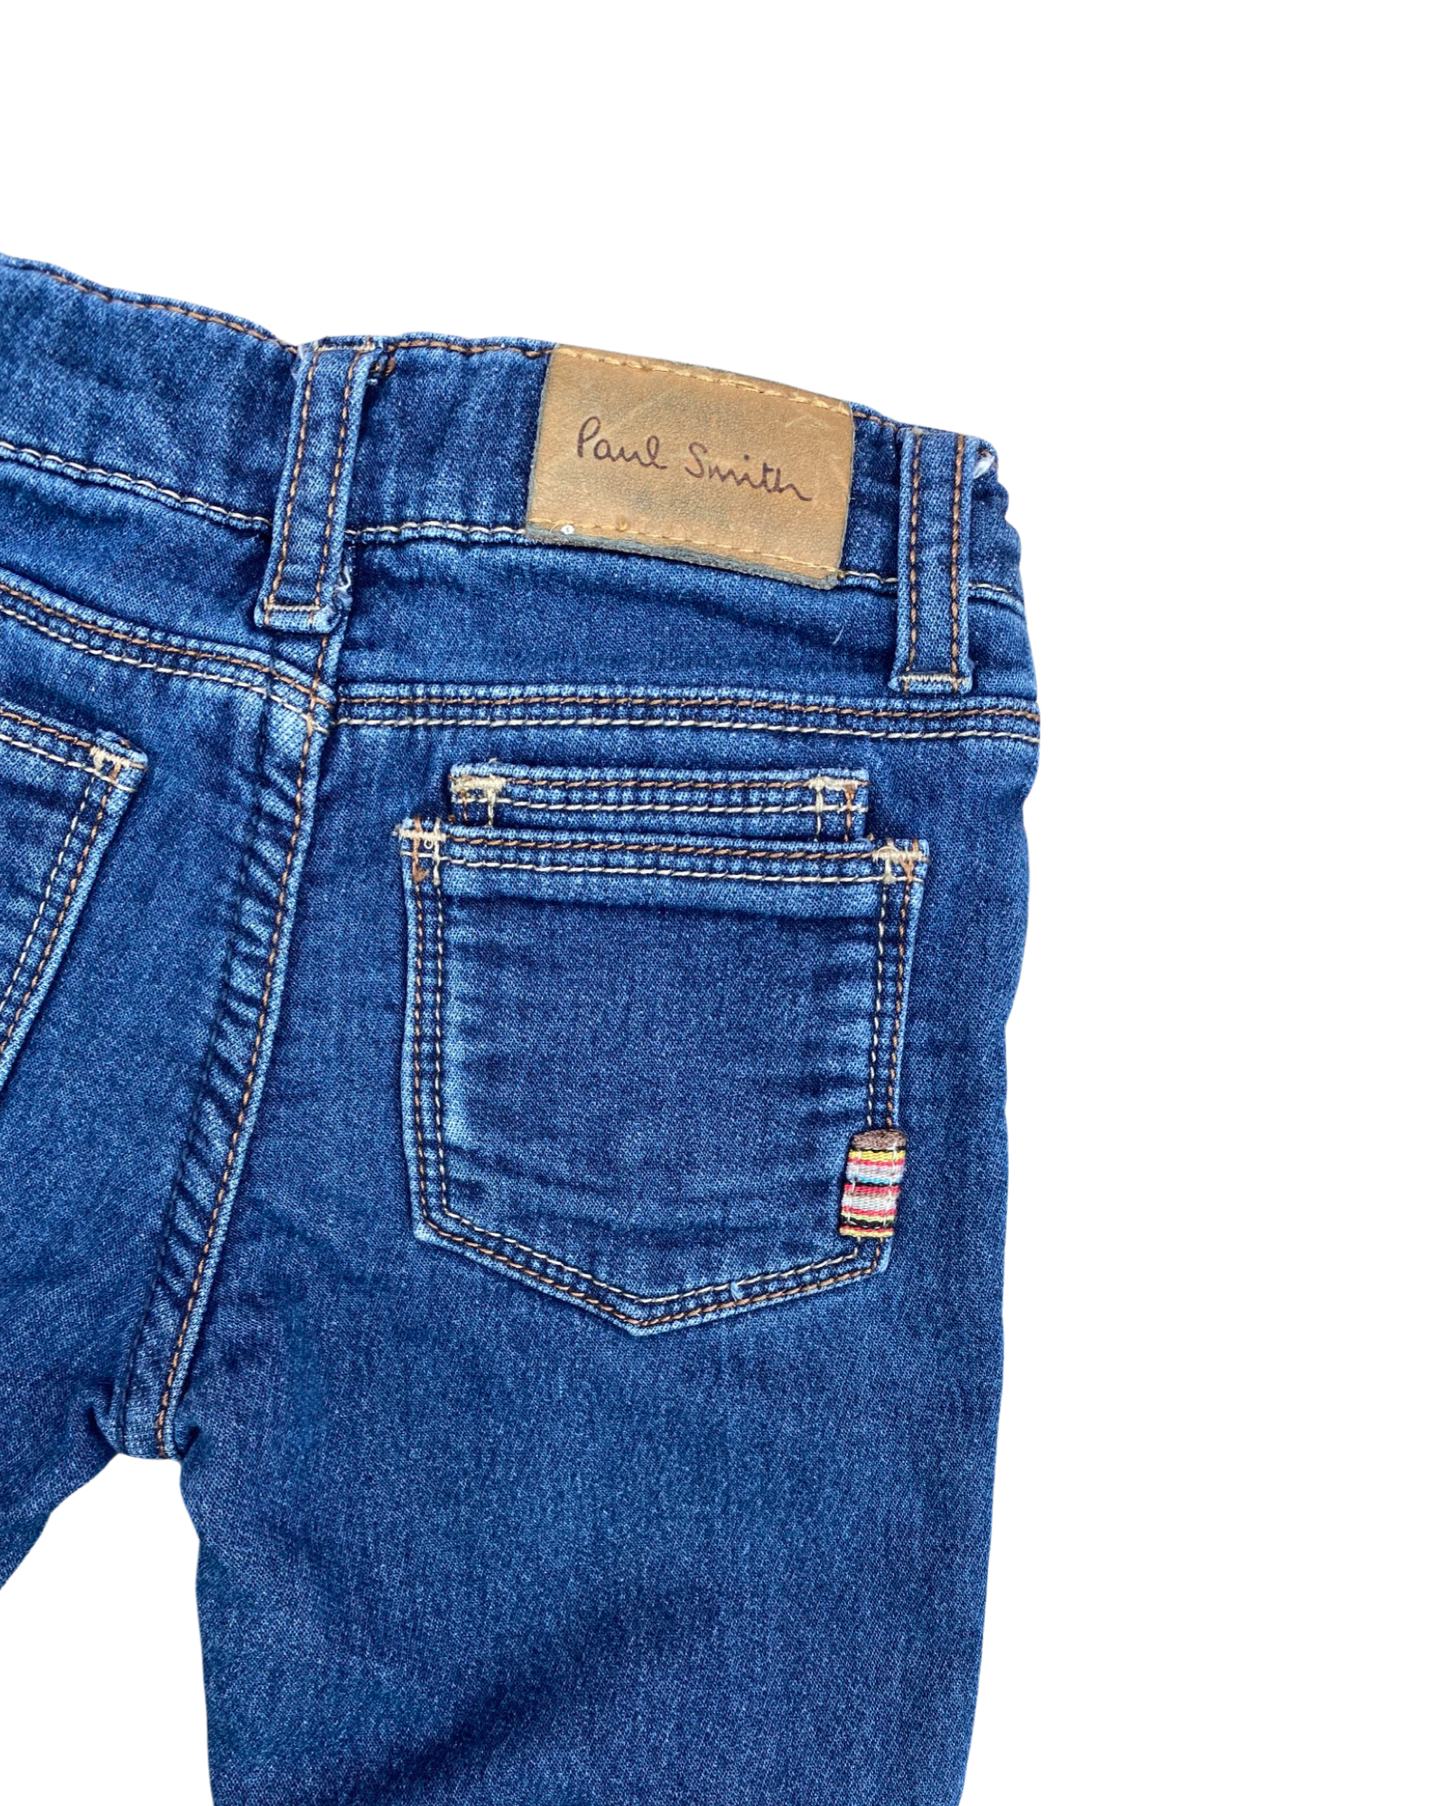 Paul Smith toddler jeans (12-18mths)